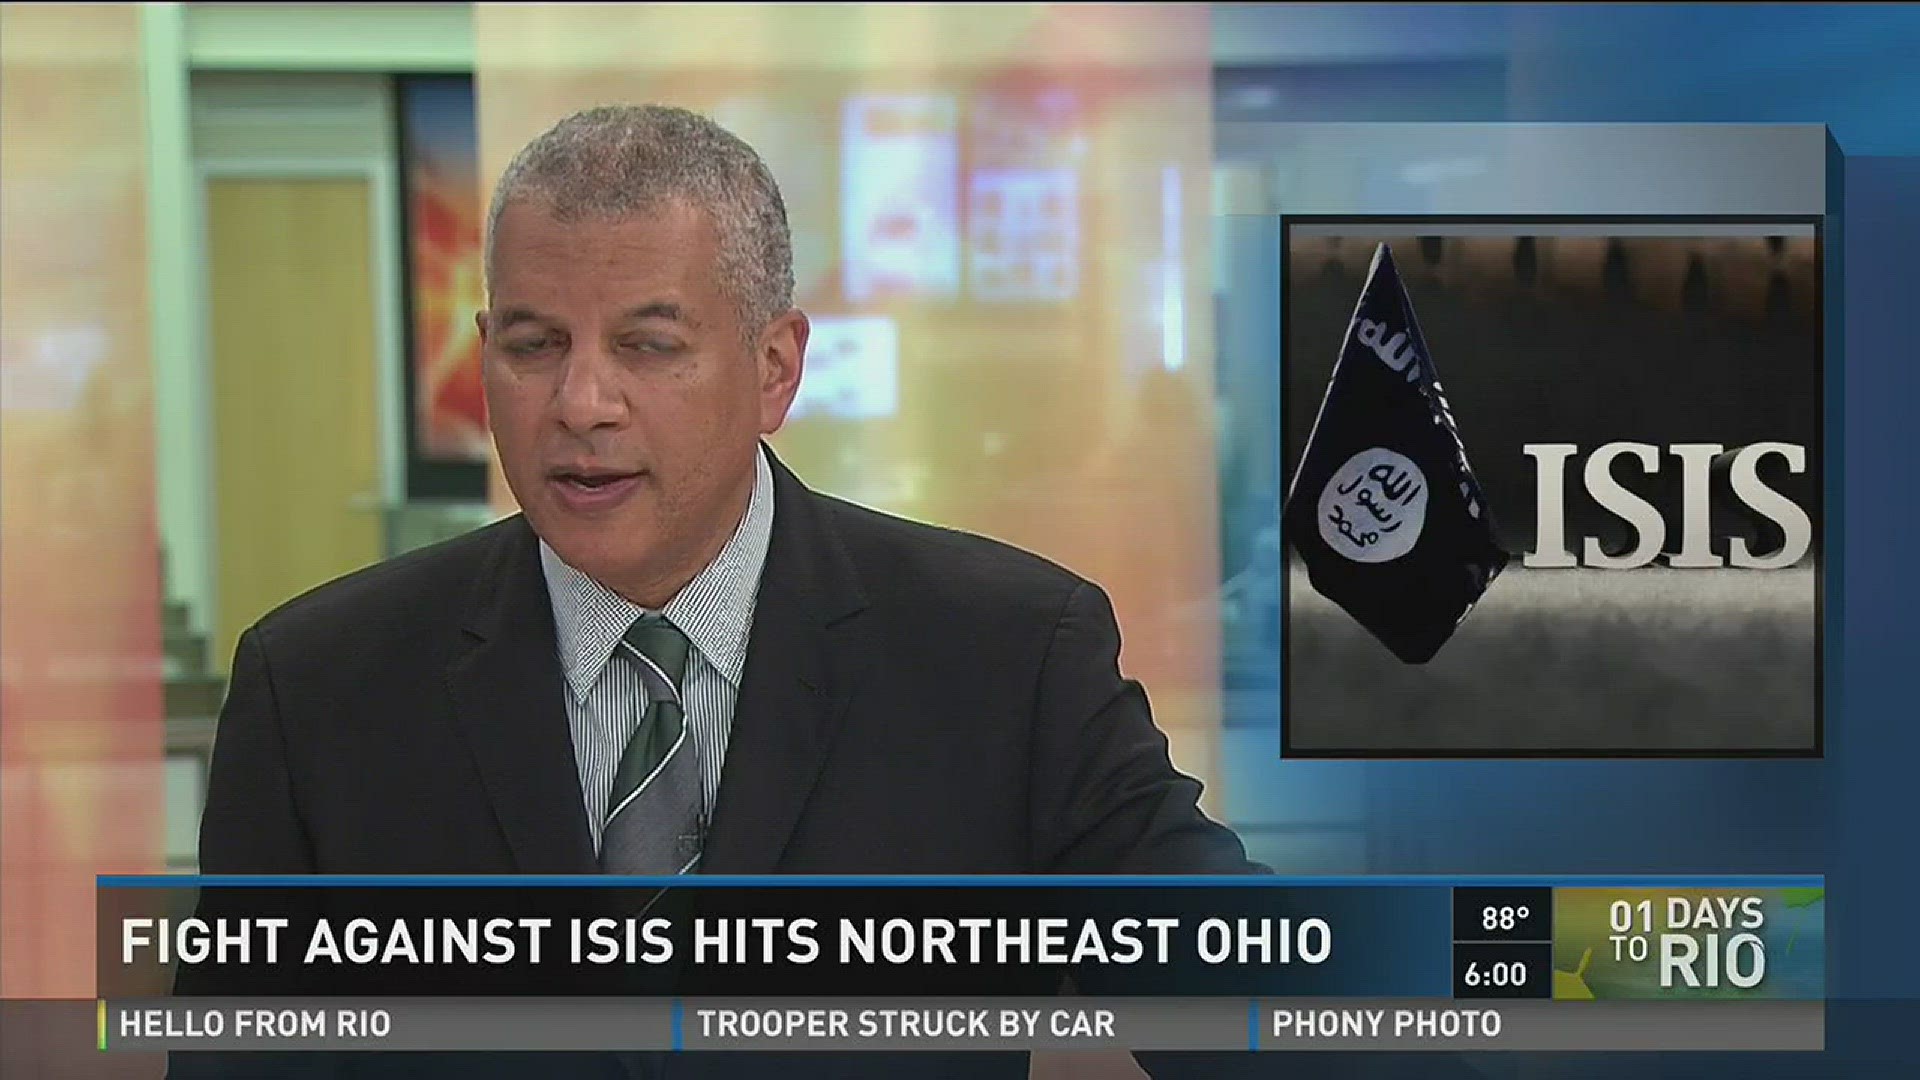 Fight against ISIS hits Northeast Ohio